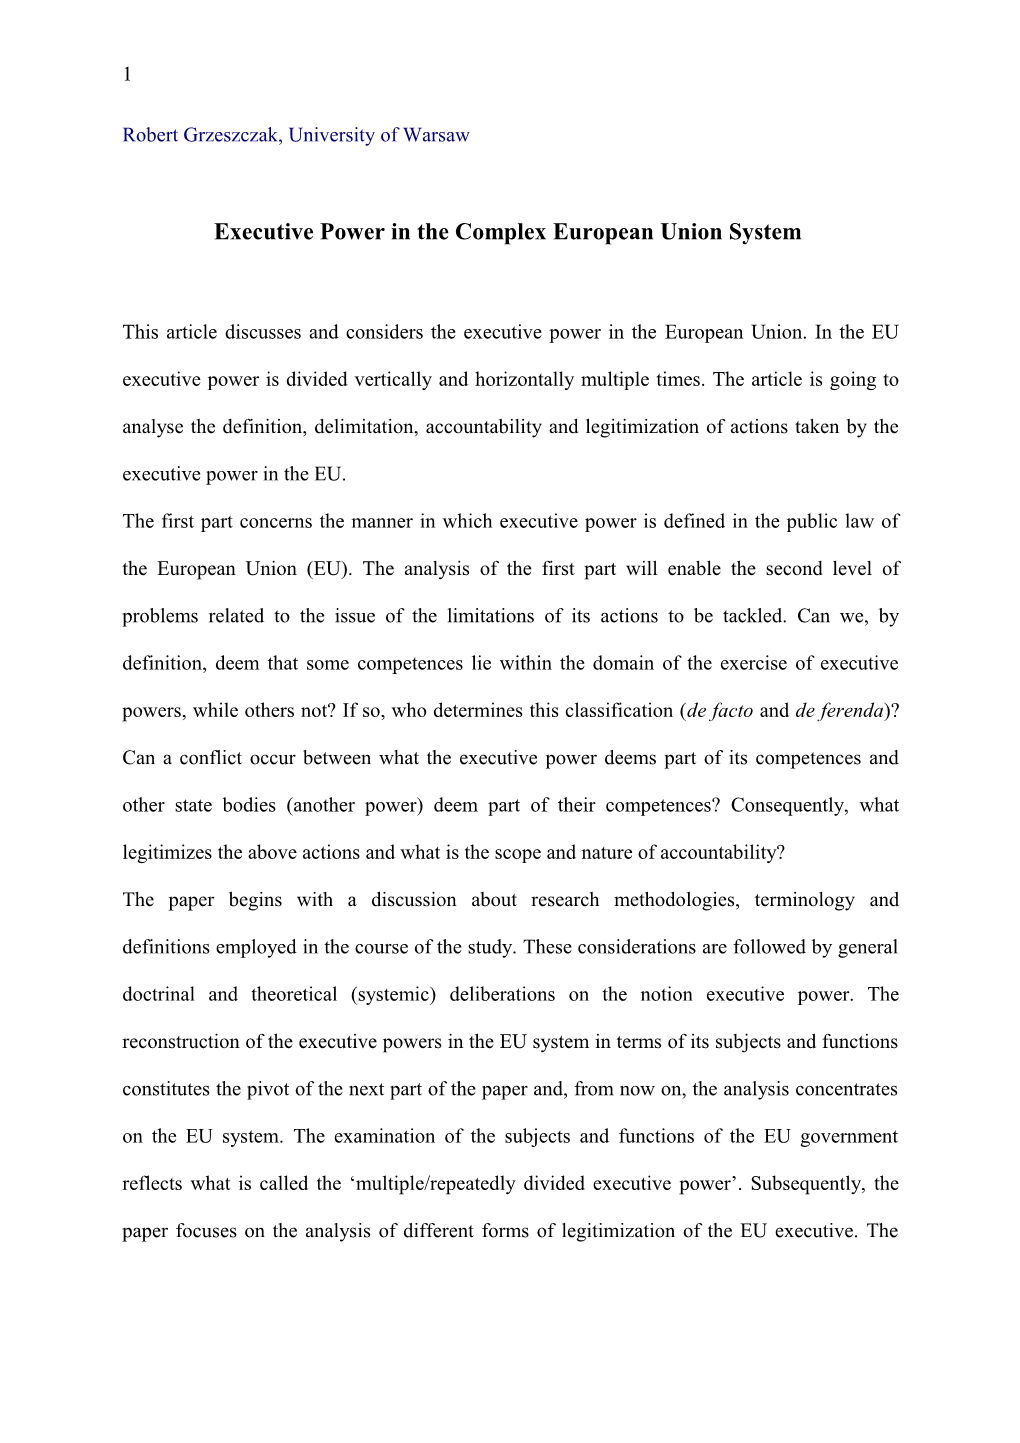 Executive Power in the Complex European Union System